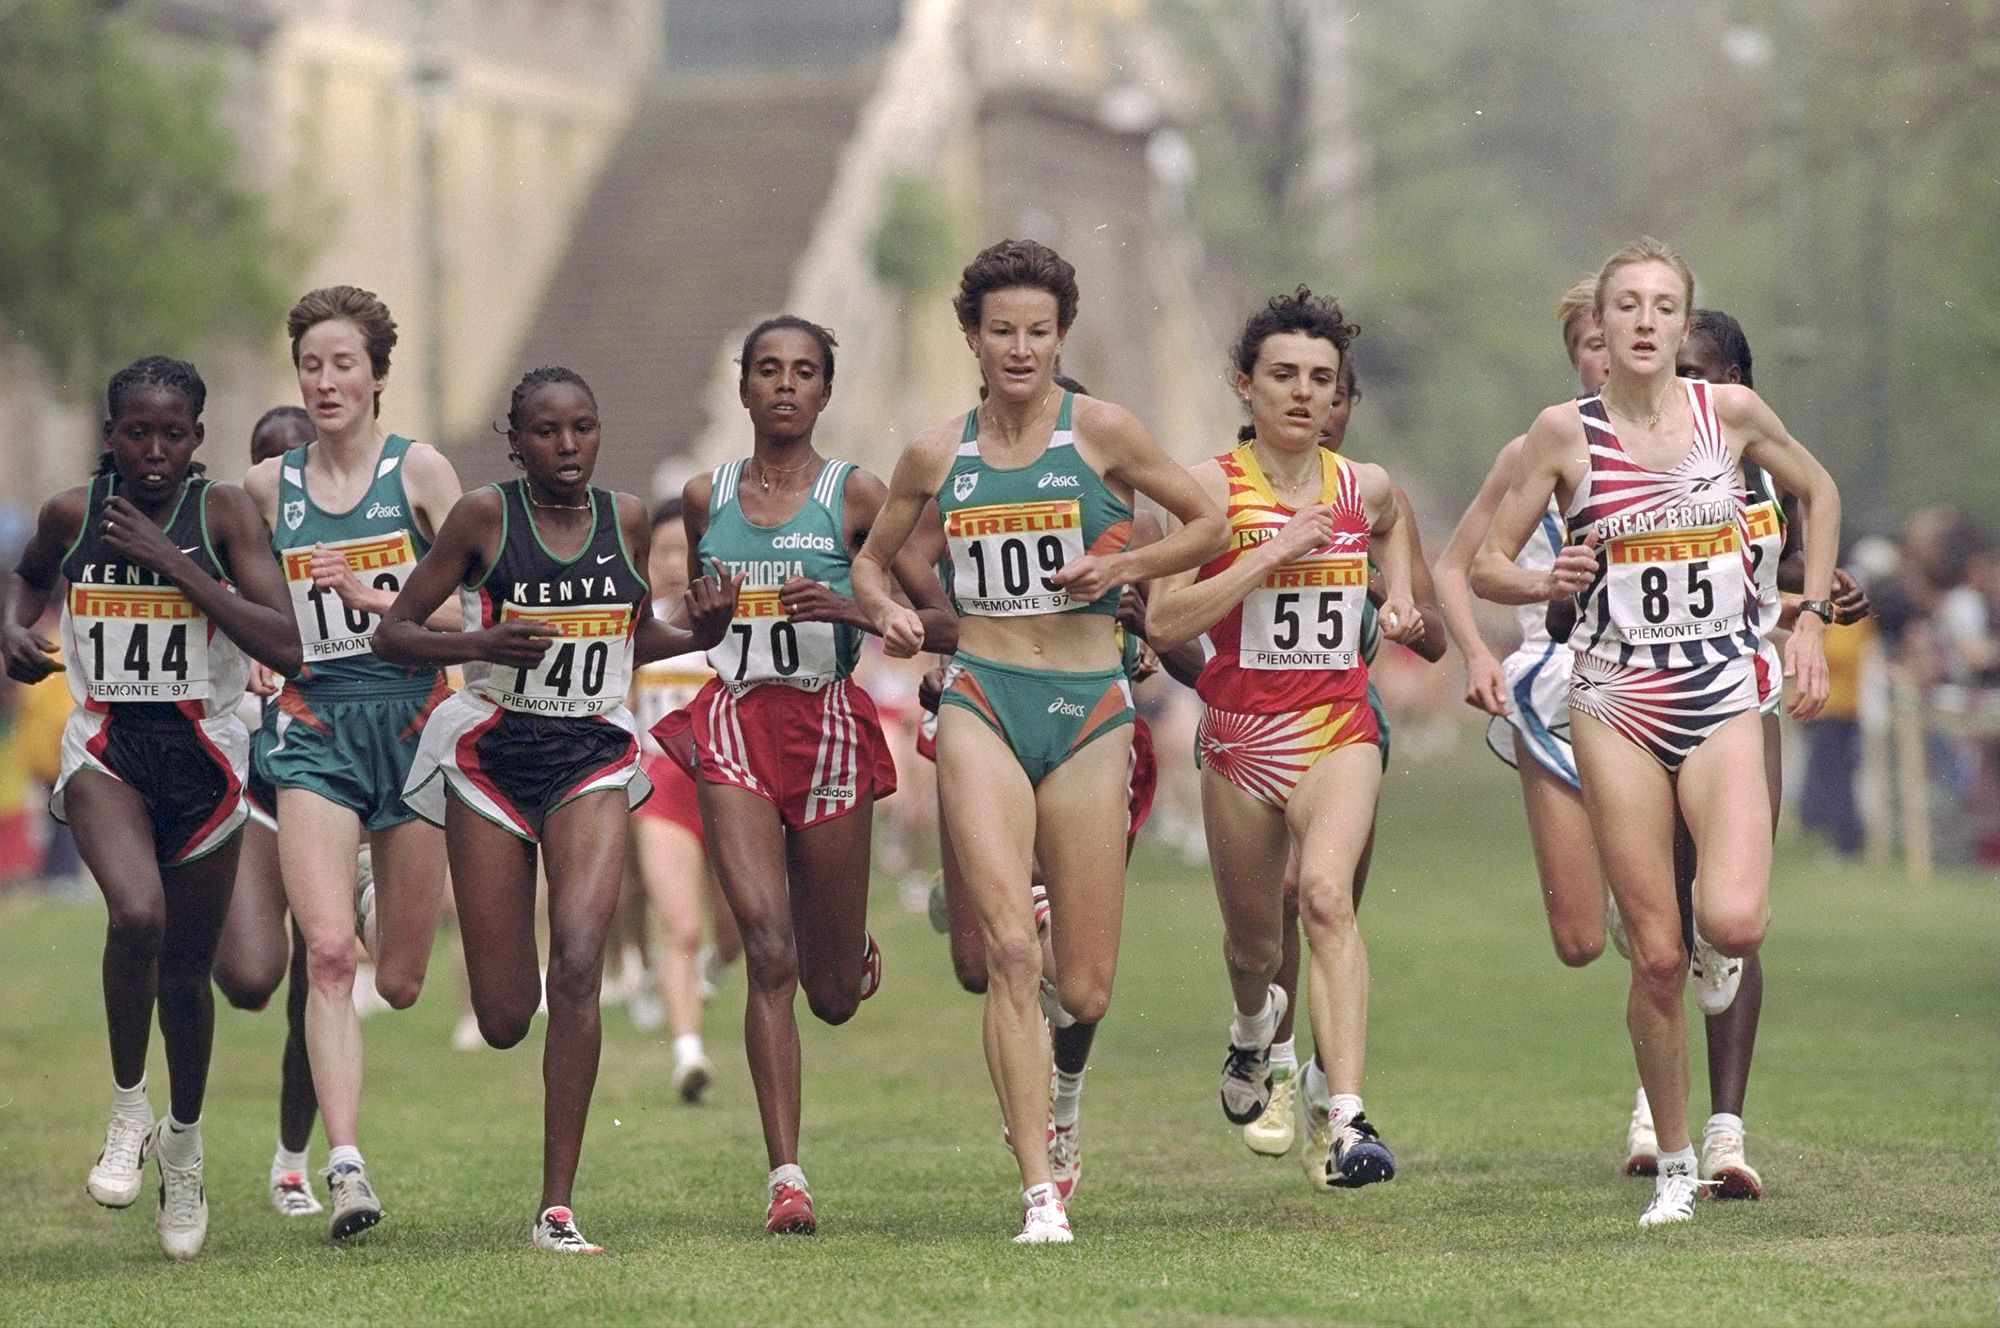 Sonia O'Sullivan in the lead pack at the 1997 World Cross Country Championships